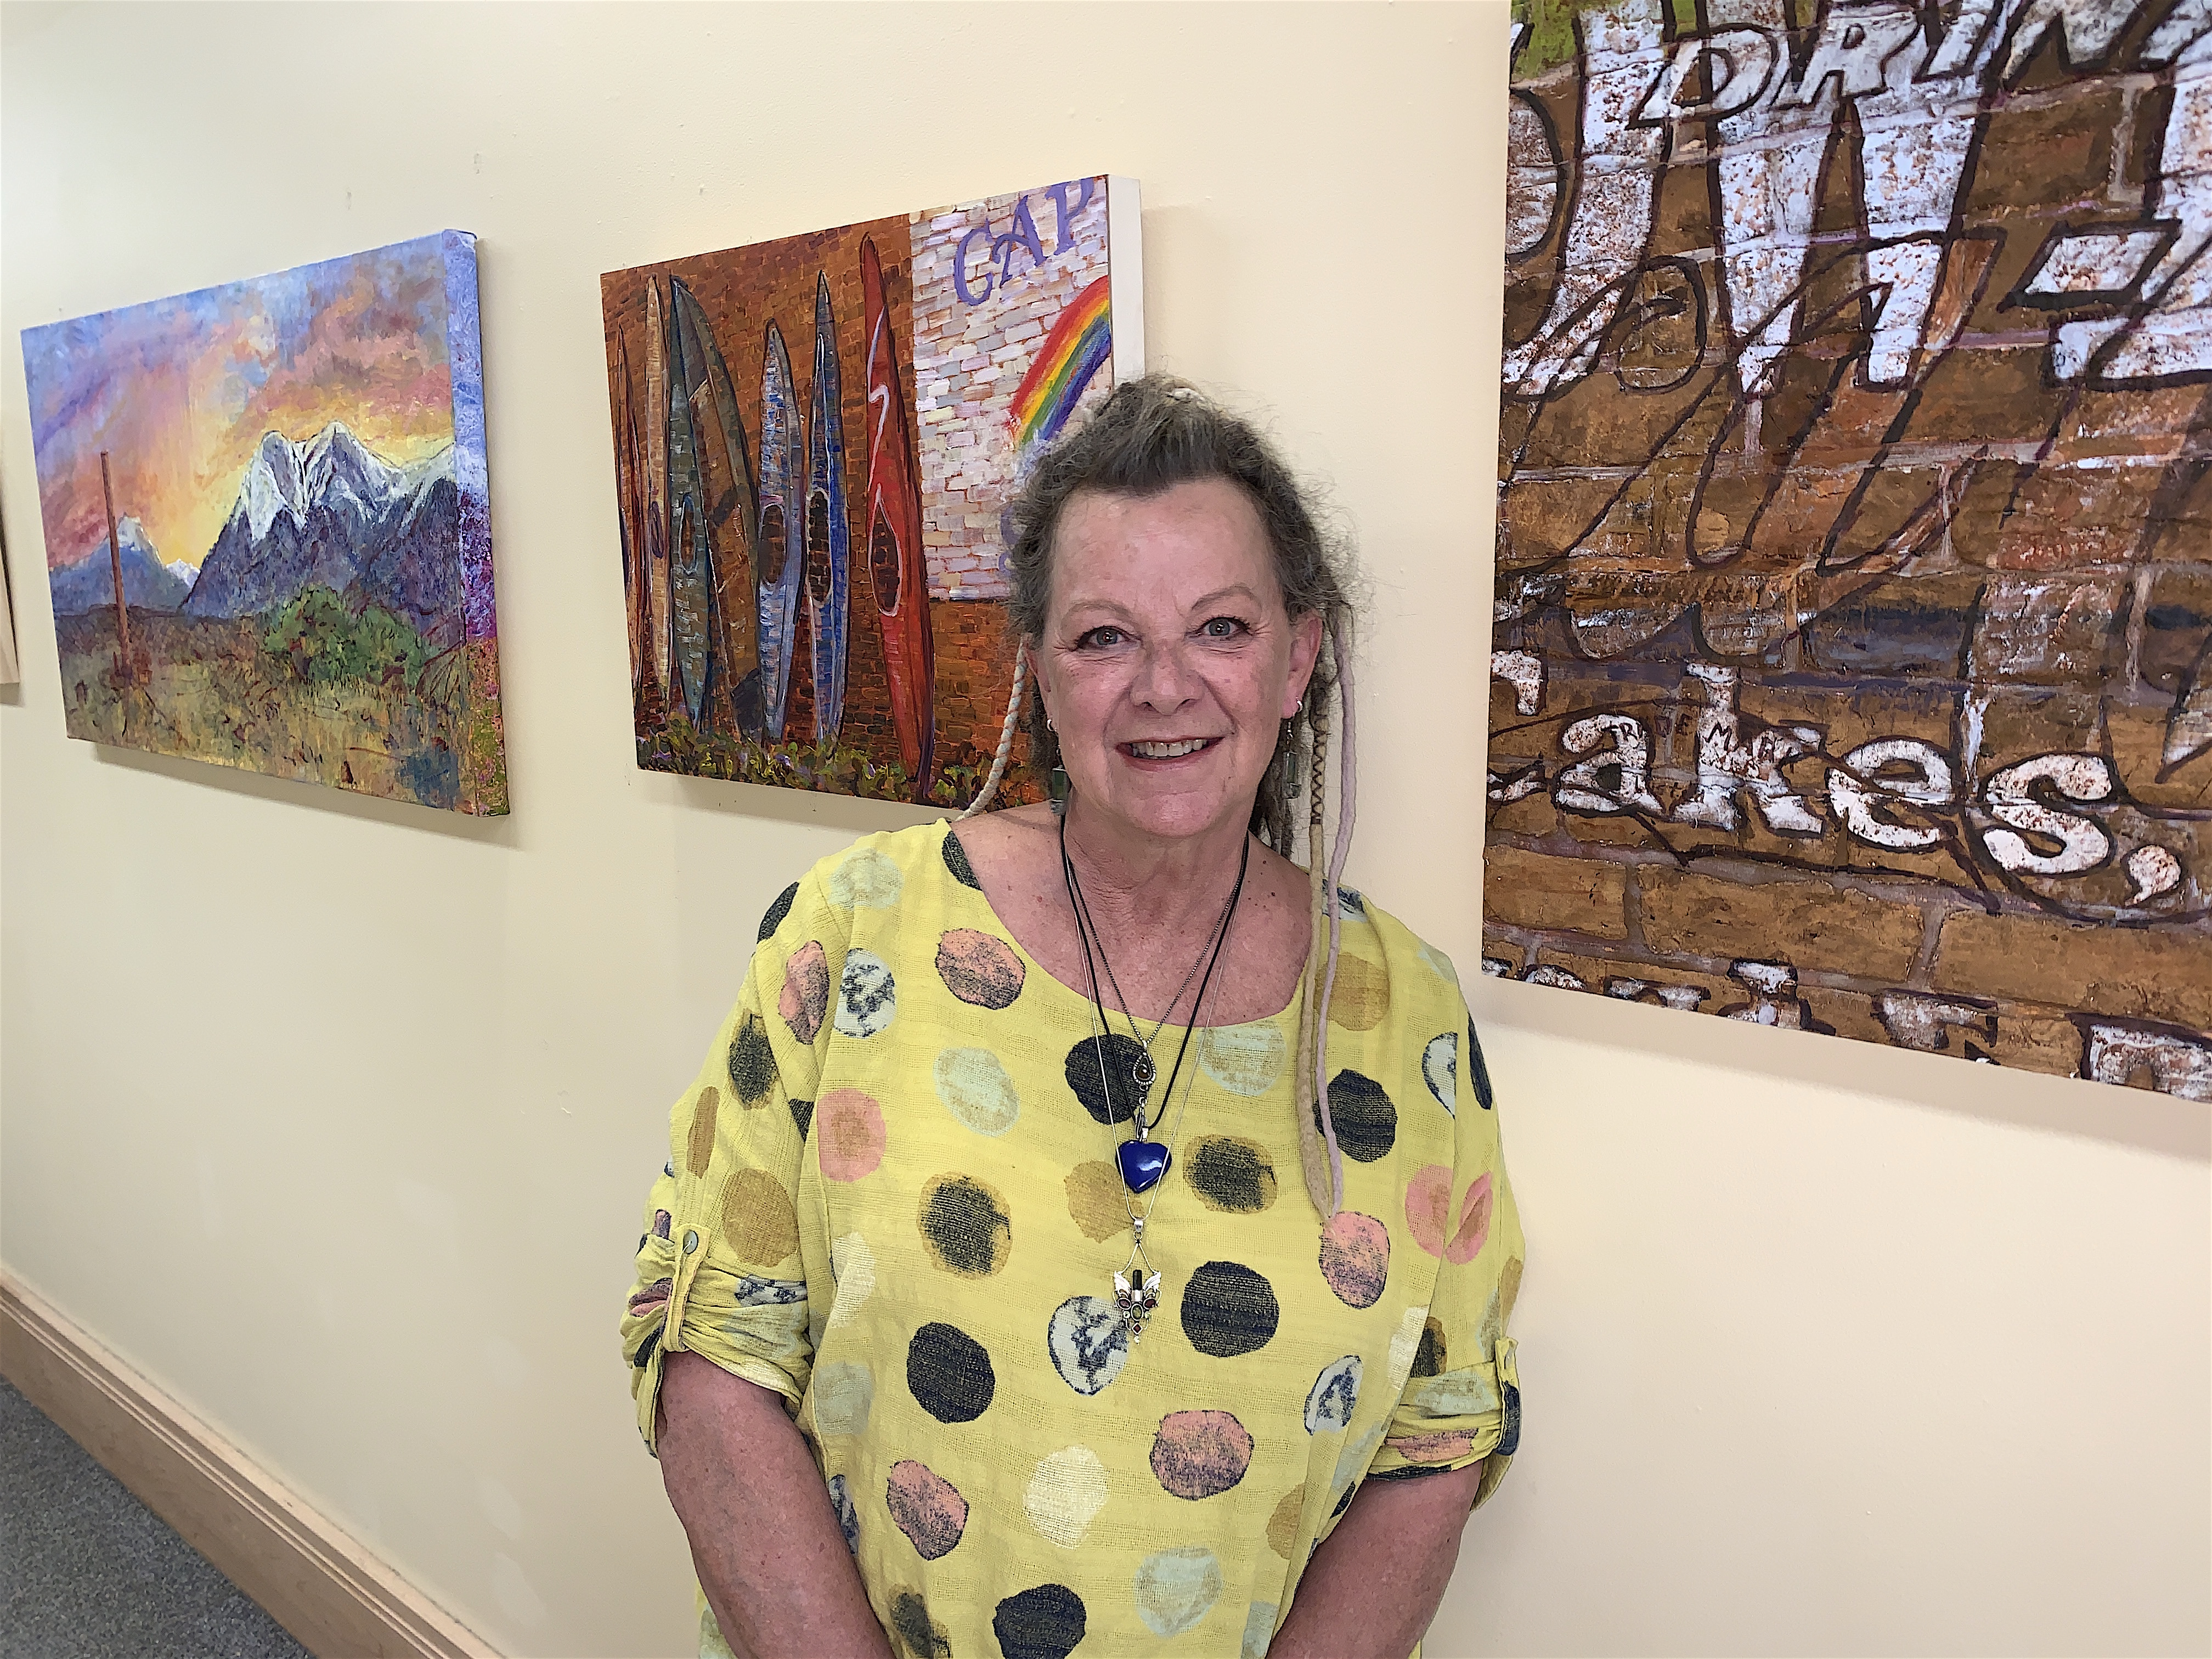 New artwork, artists reception at HRRMC - by Daniel Smith - Ark Valley ...